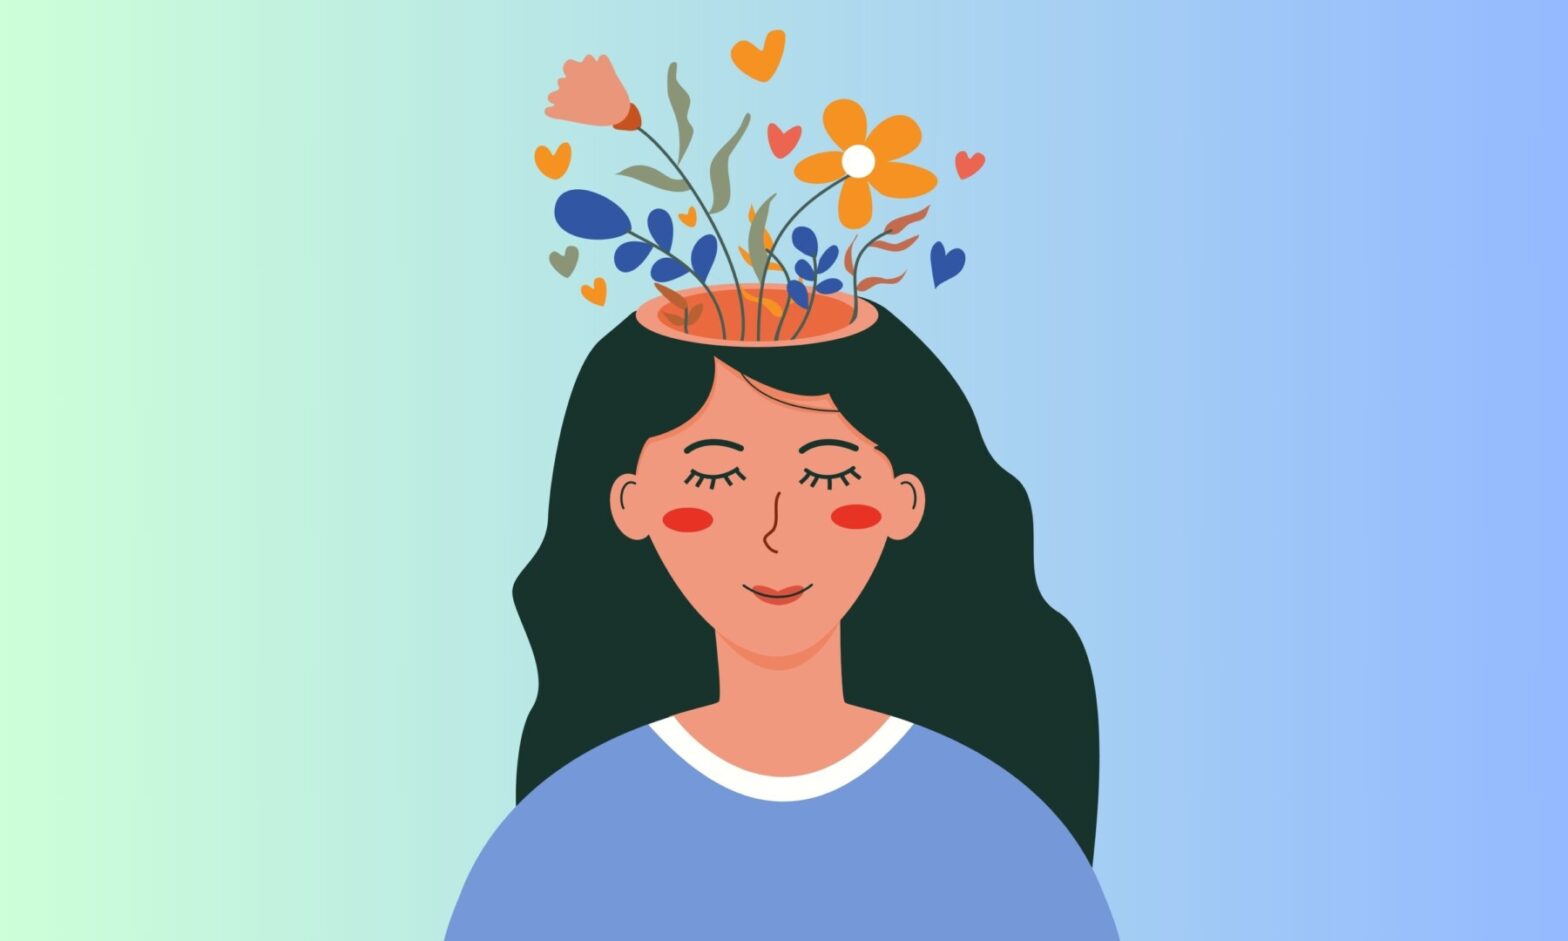 An illustration of a woman smiling with flowers coming out of the top of her head.